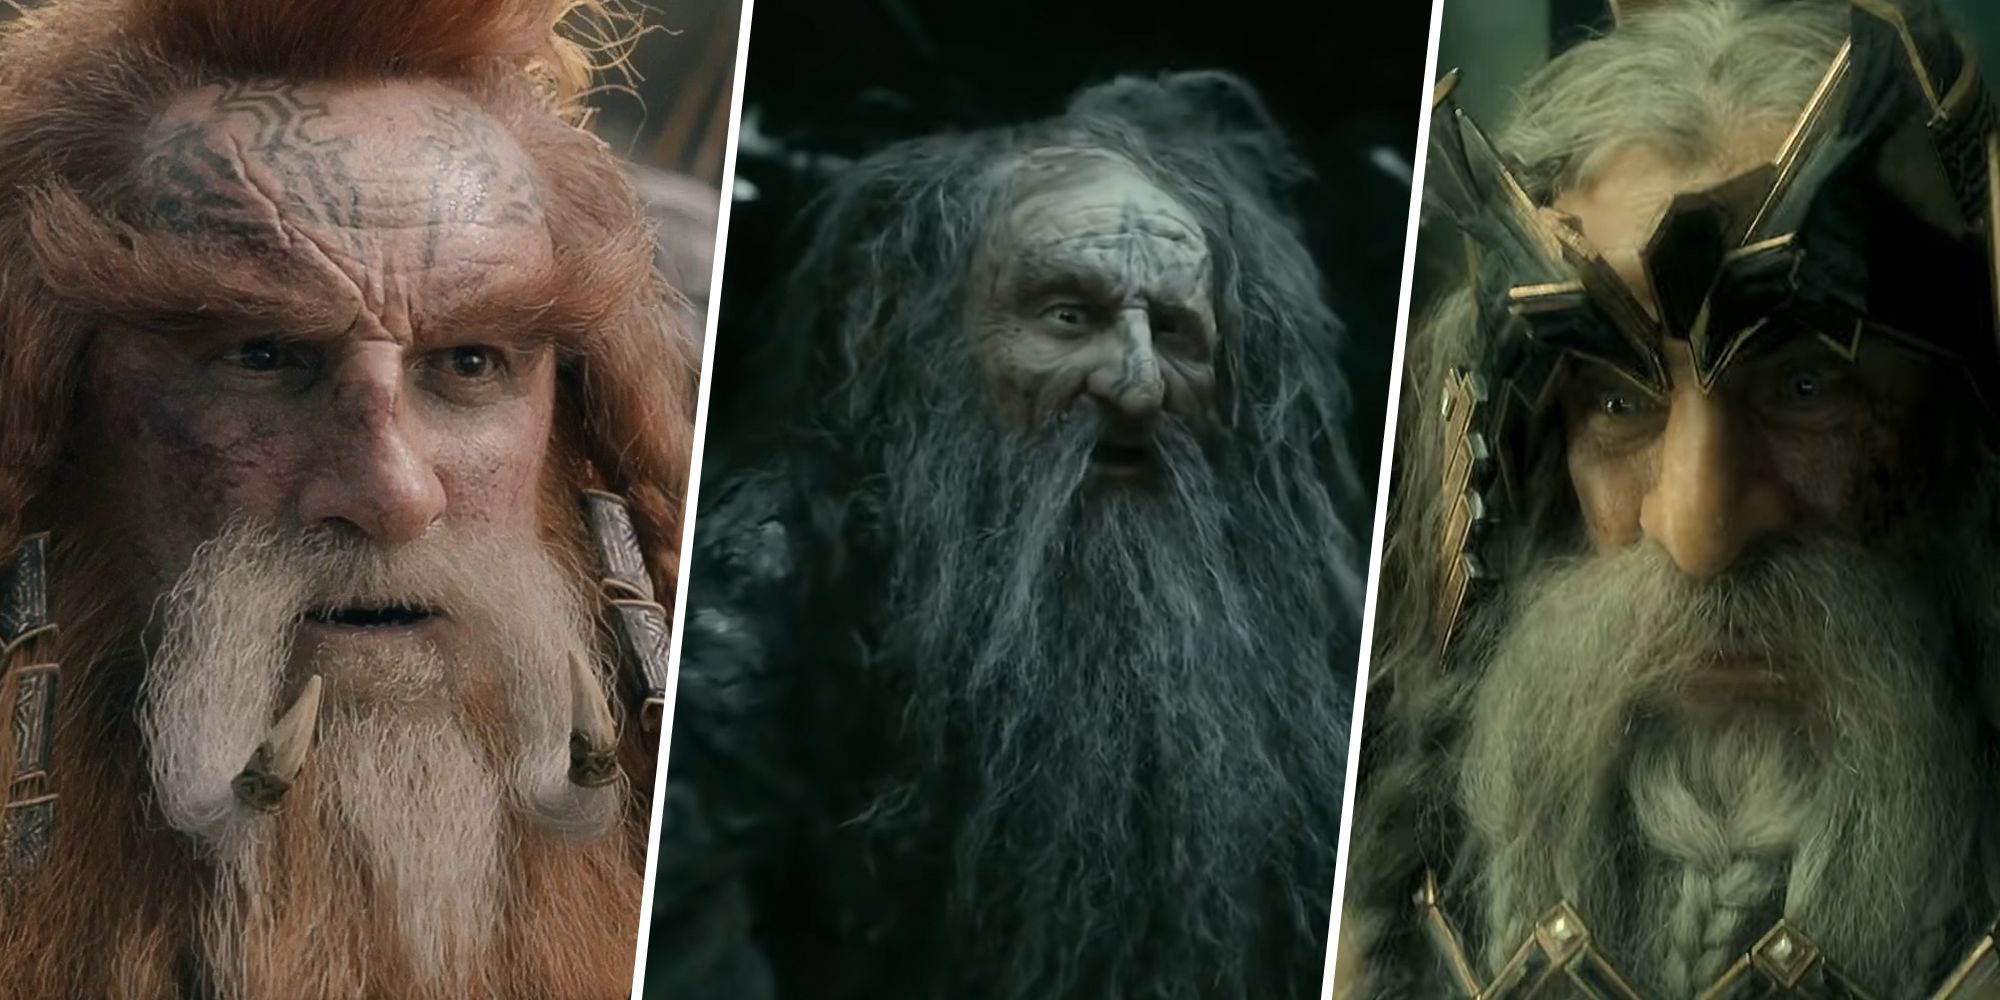 Dain Ironfoot, Thrain, and Thror the Dwarf Lords from Lord of the Rings and The Hobbit